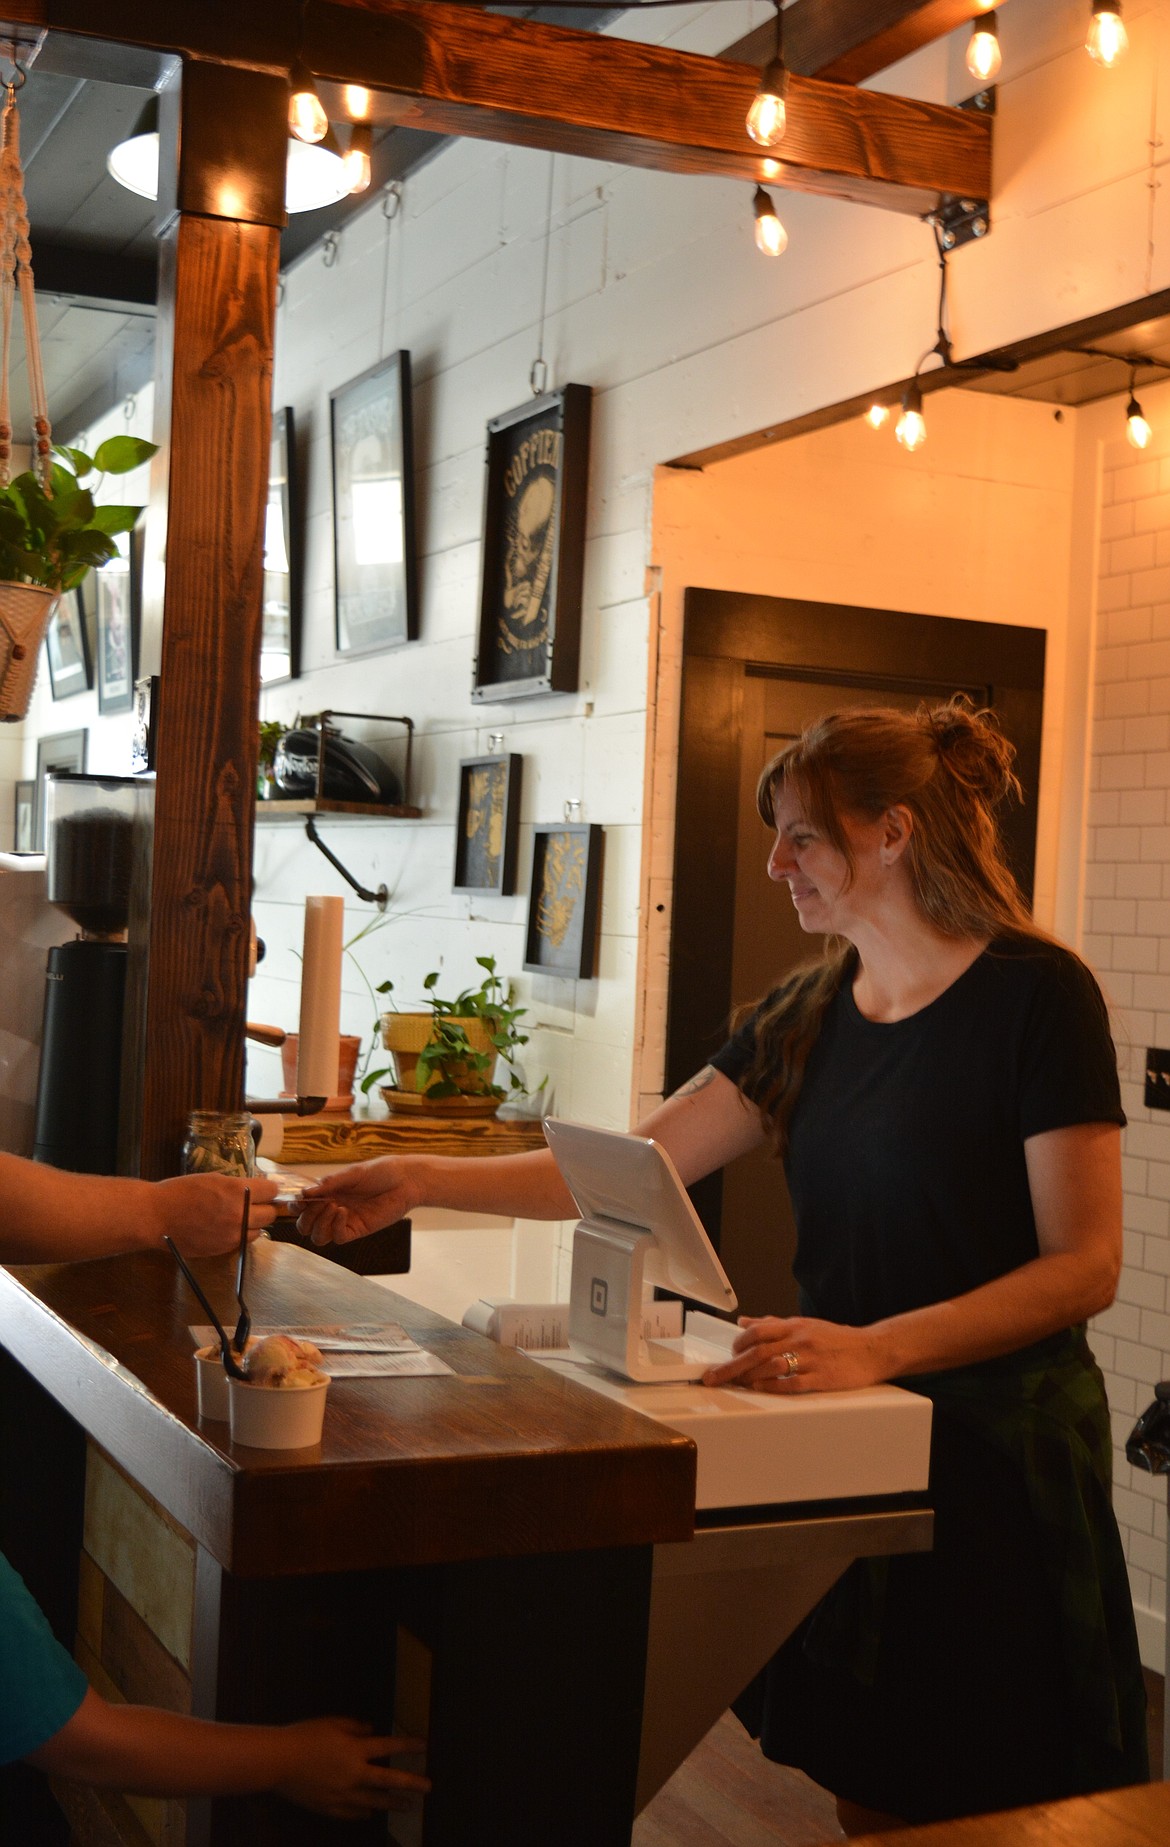 Karie Cleveland rings up a food order at the counter of the Tin Snug. The Clevelands opened their combined café and record store in Wallace in early August after relocating from the Portland/Vancouver area.